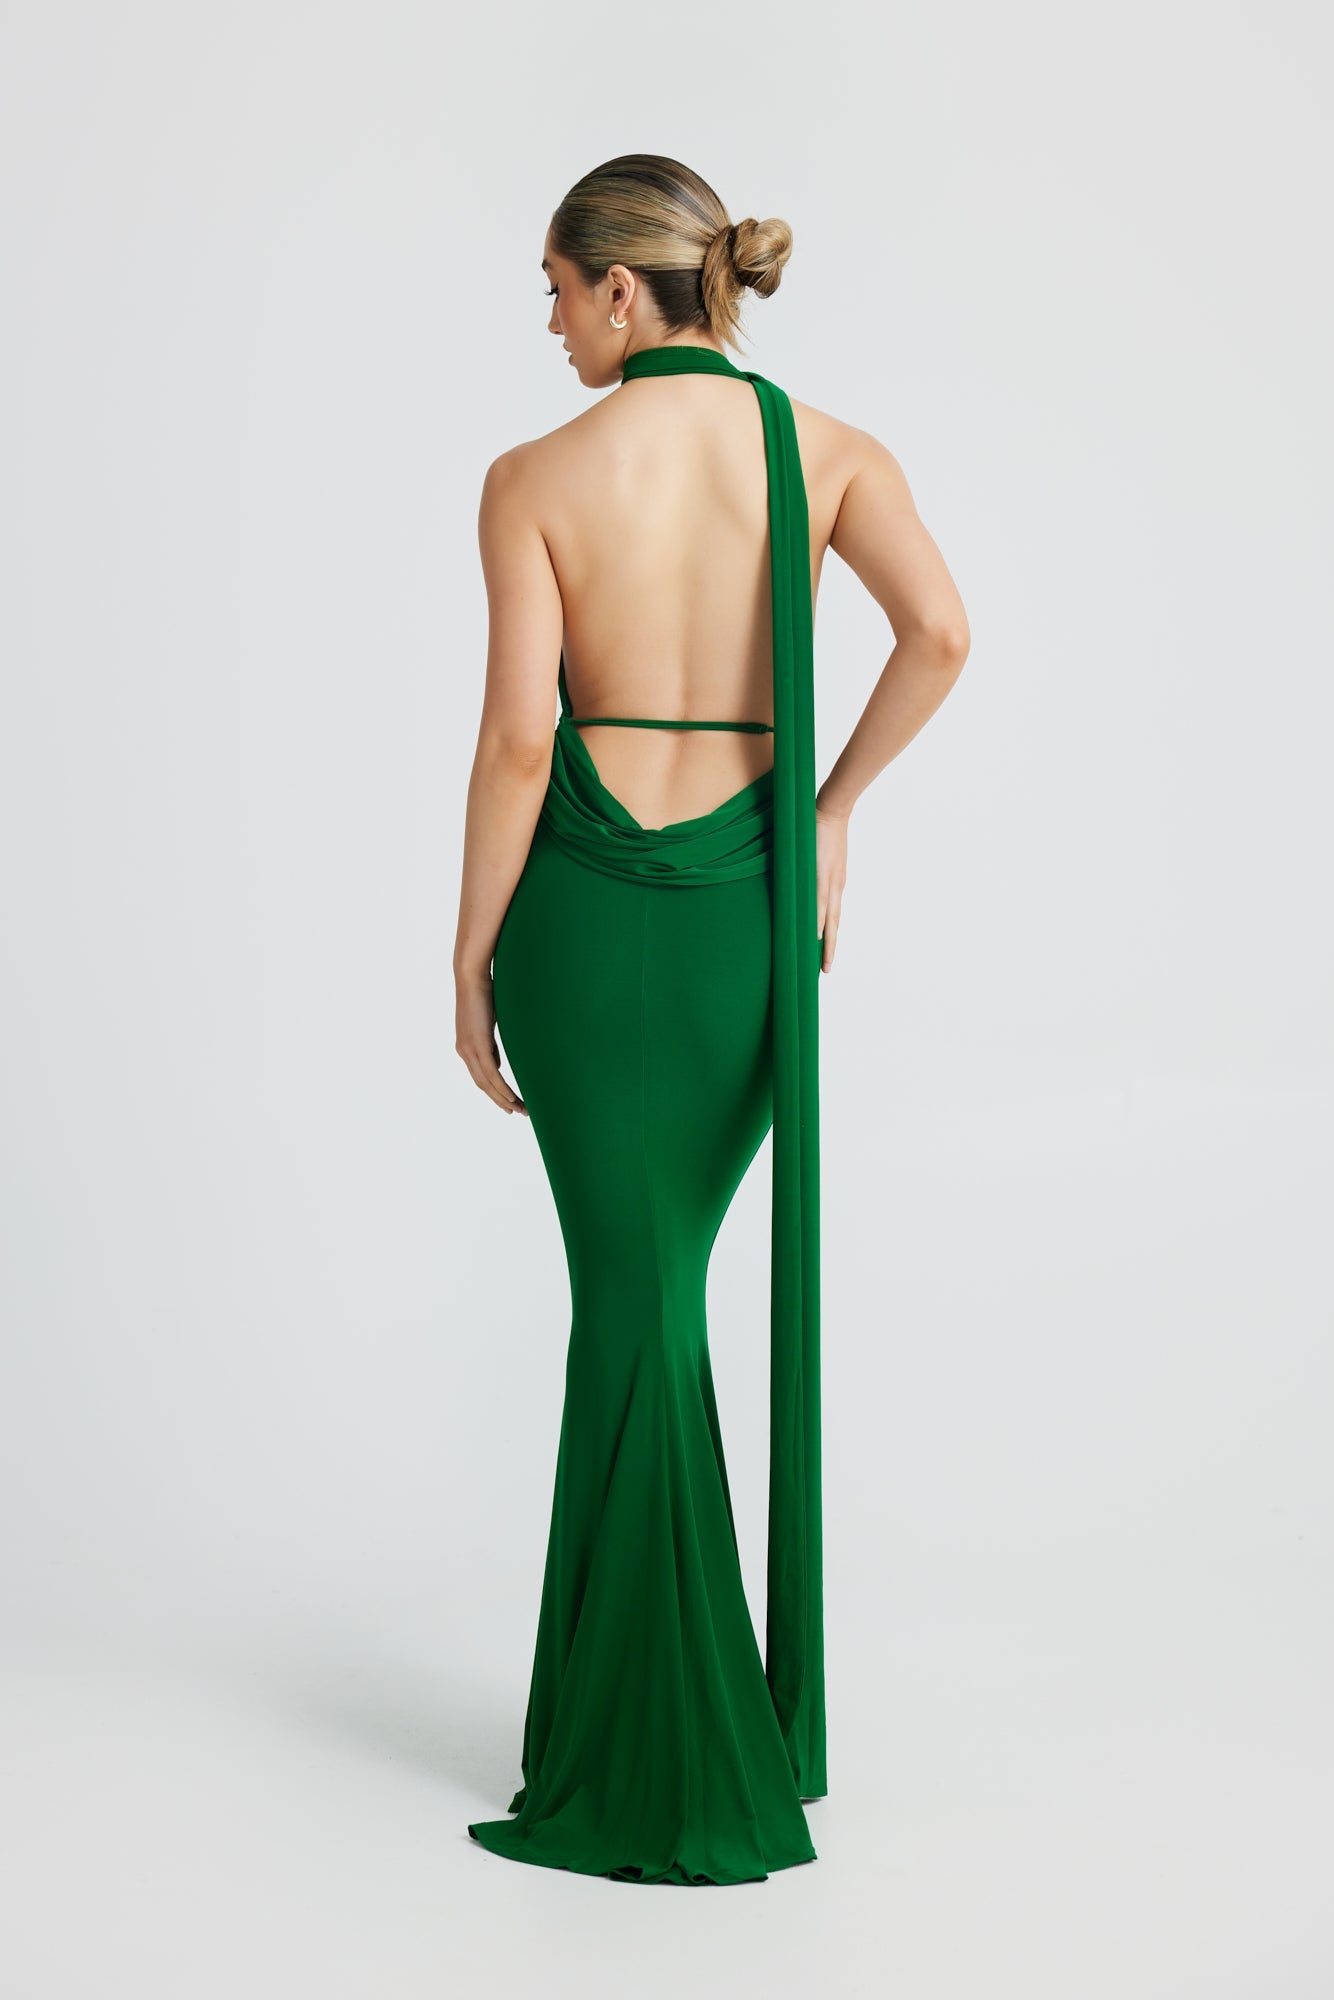 MÉLANI The Label SOFIA Green Asymmetric Backless Form Fitted Dress